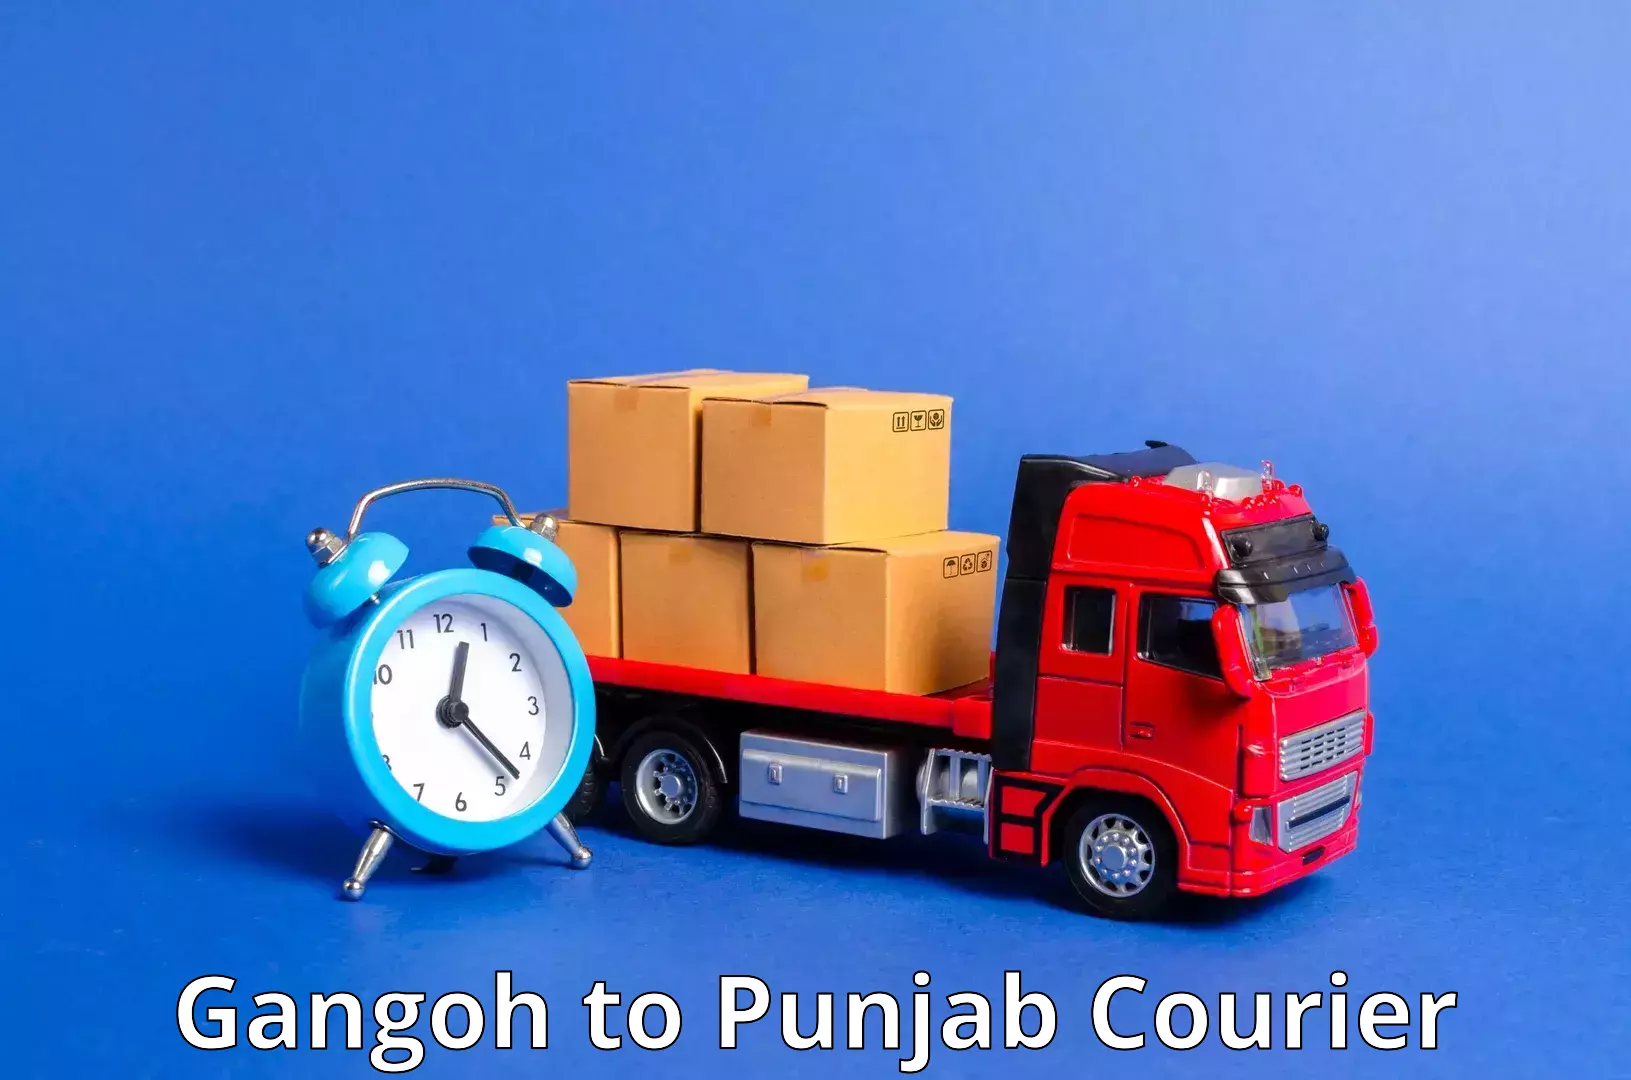 State-of-the-art courier technology Gangoh to Punjab